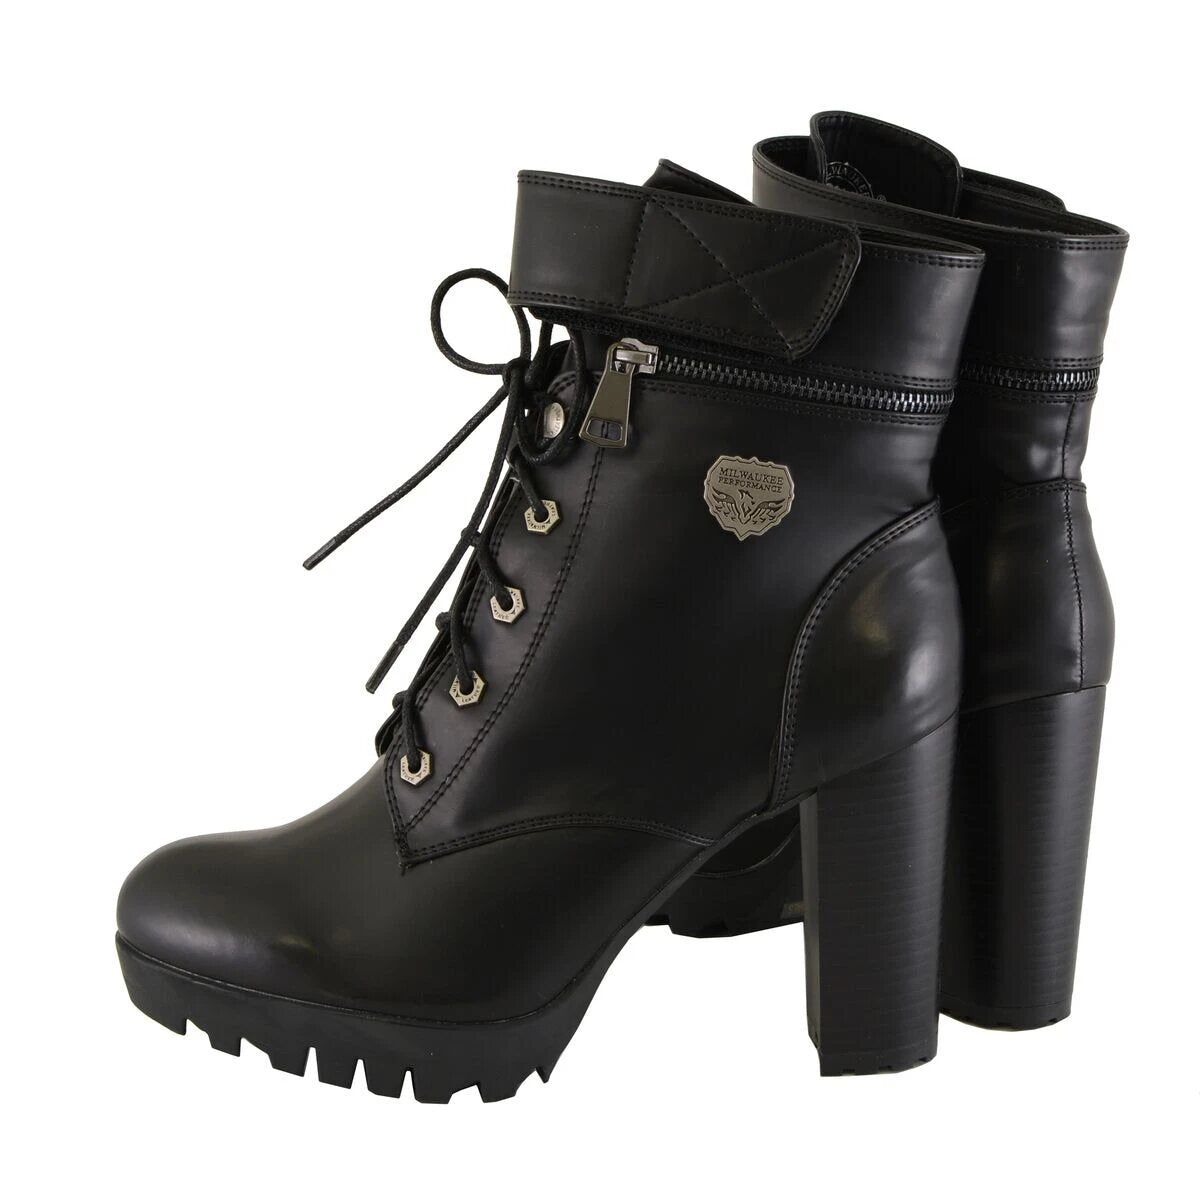 Womens Black Lace-Up Boots with Double Height Option